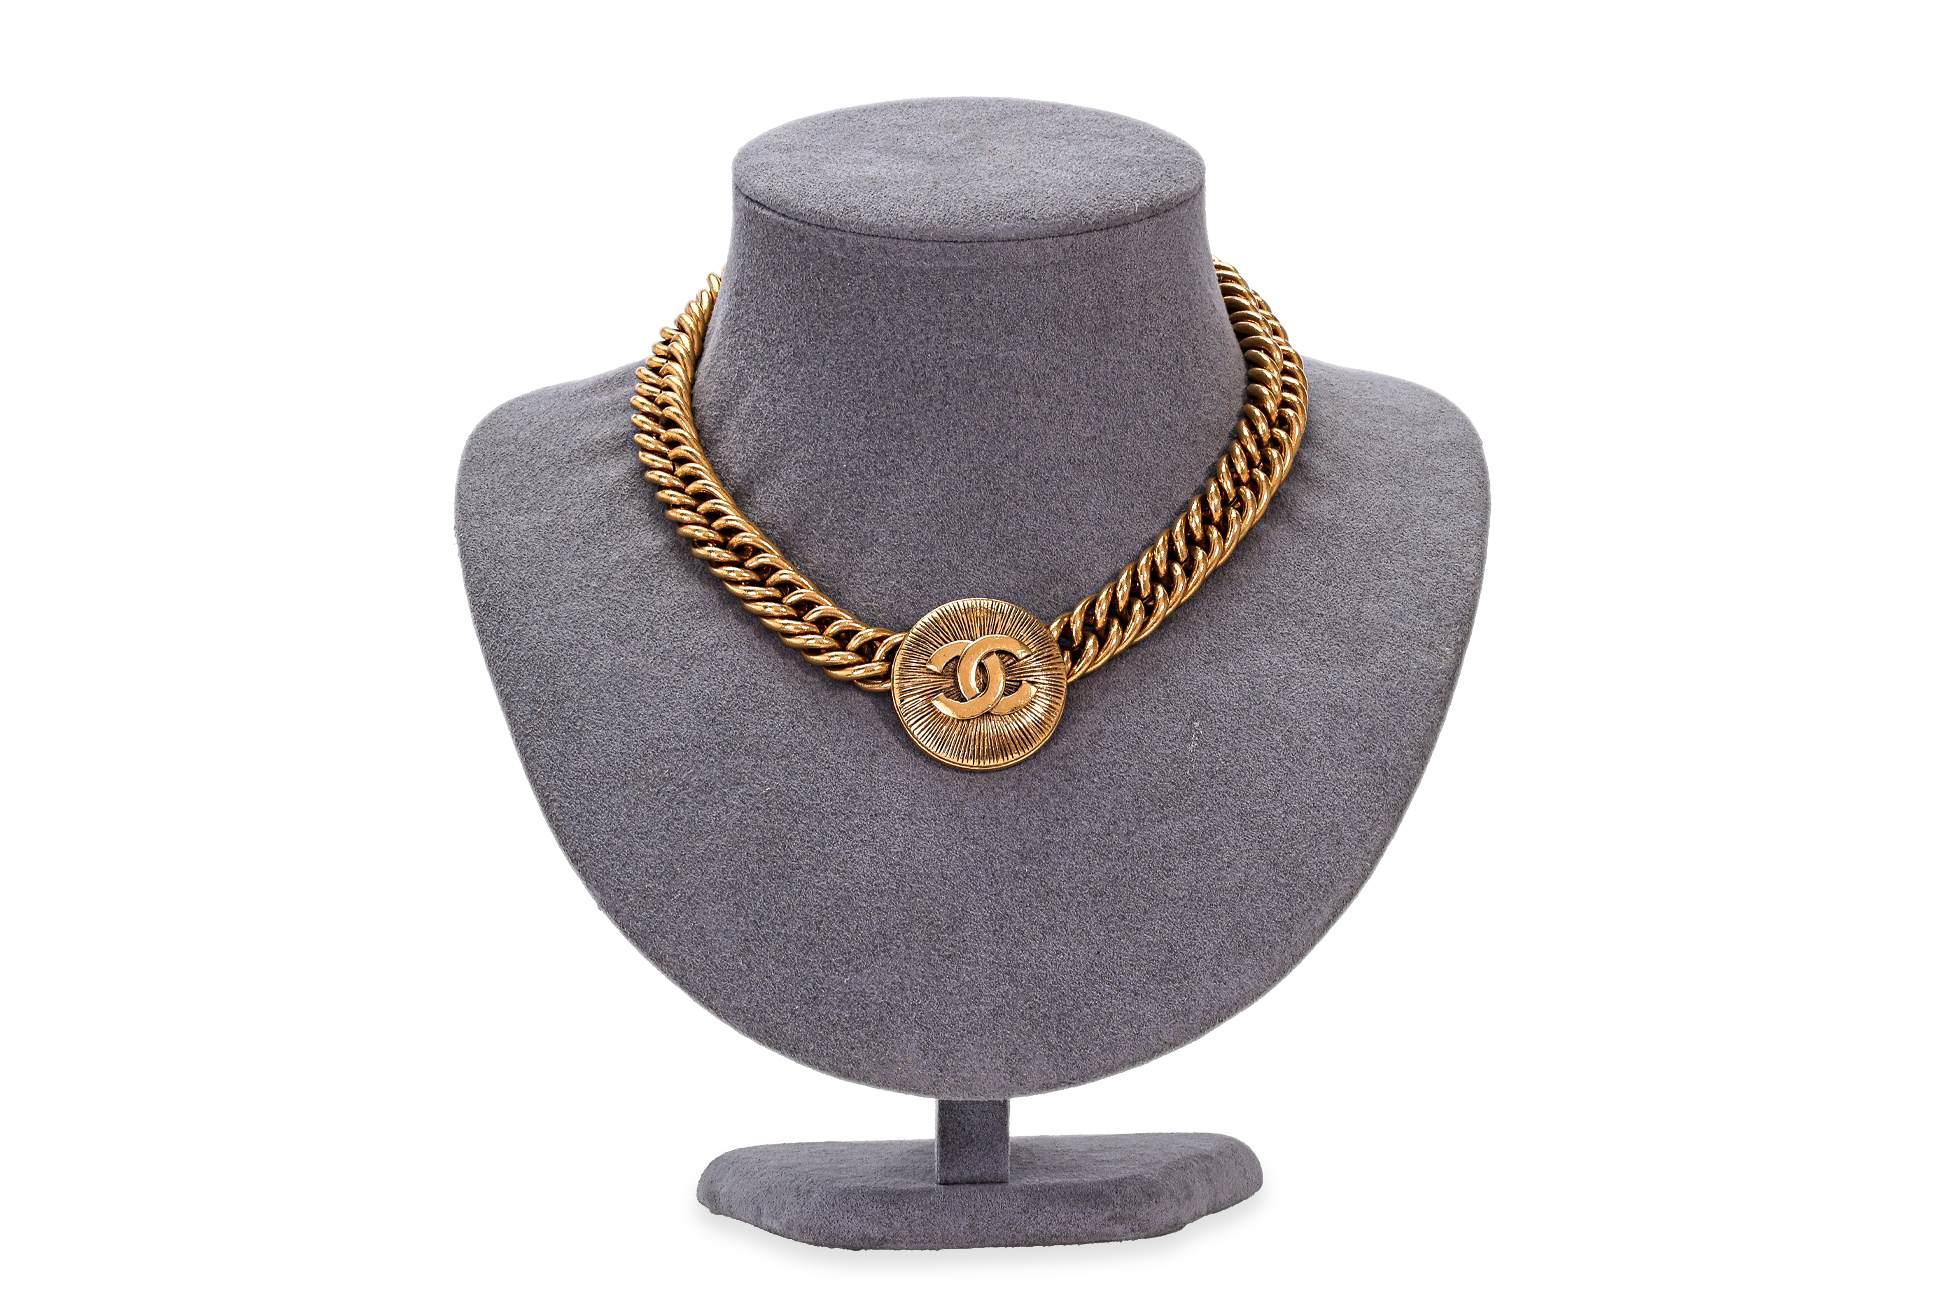 A CHANEL CC MEDALLION CHOKER NECKLACE - Image 2 of 2